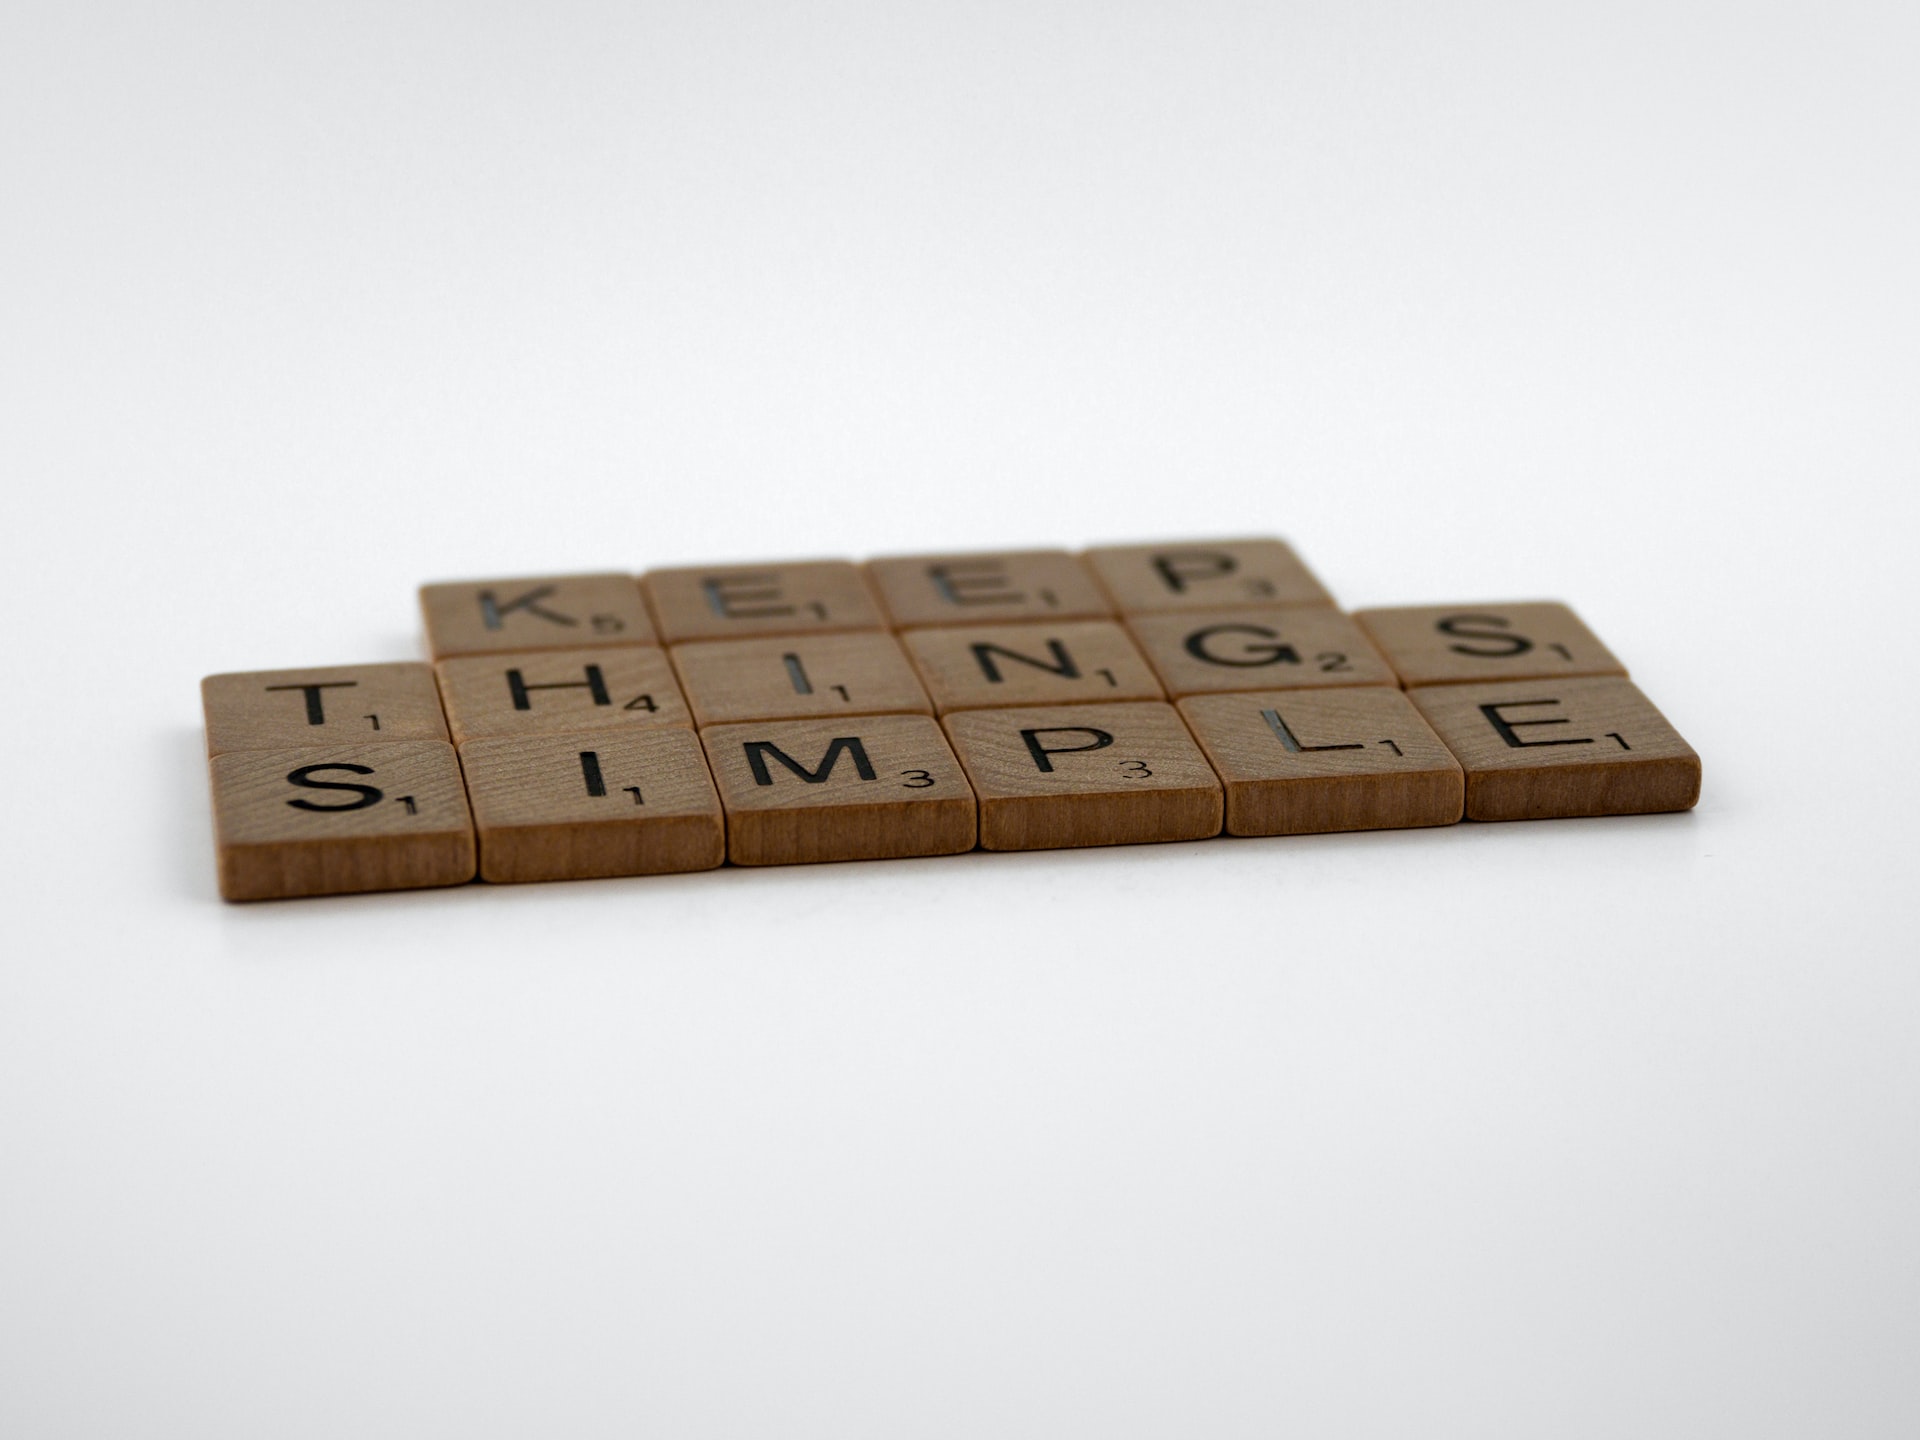 A scrabble tile that says keep things simple.